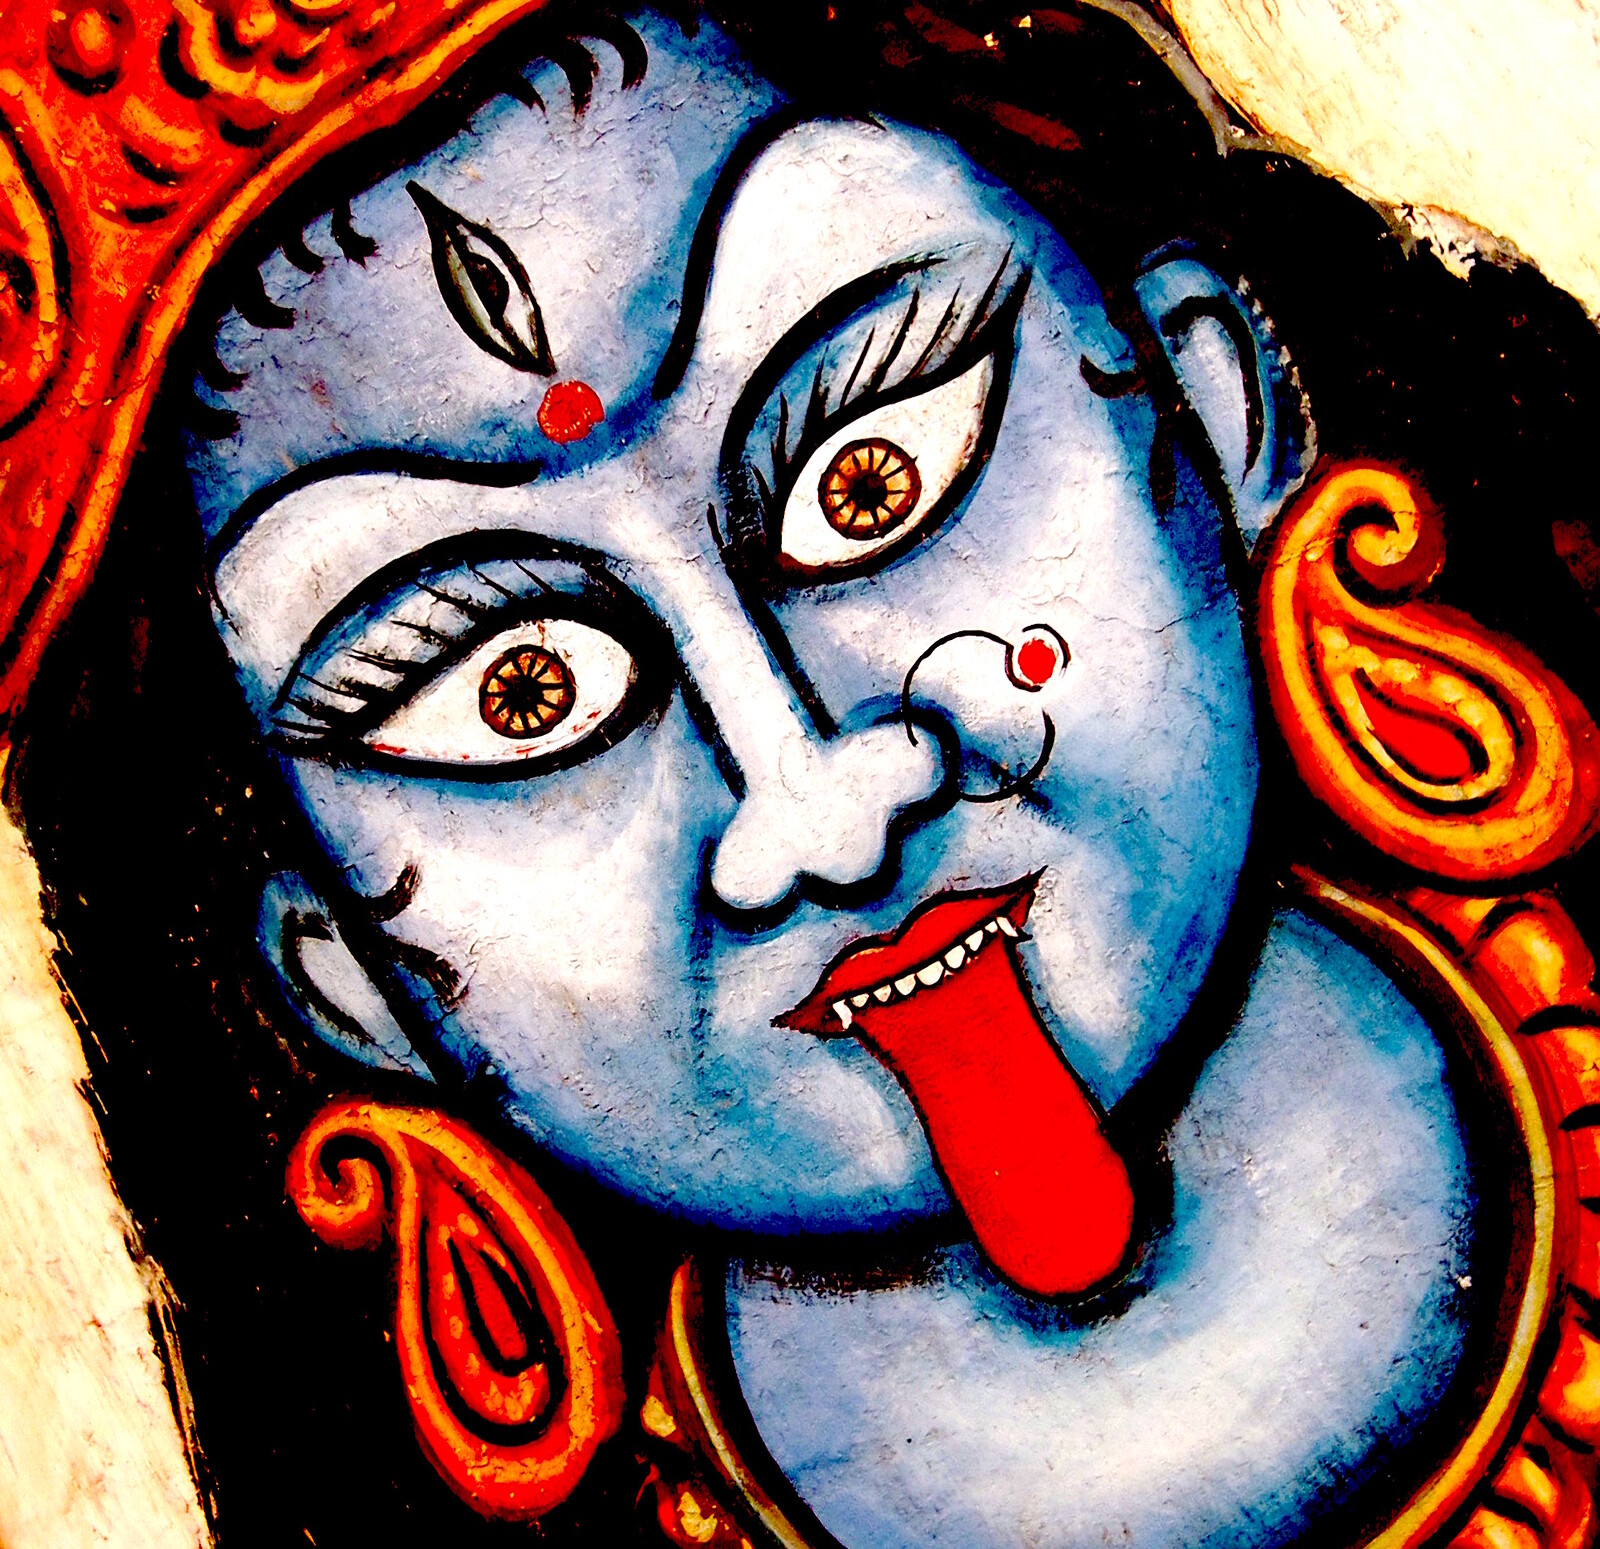 KALI, by Emily Hennessey & Sheema Mukherjee at The Cube